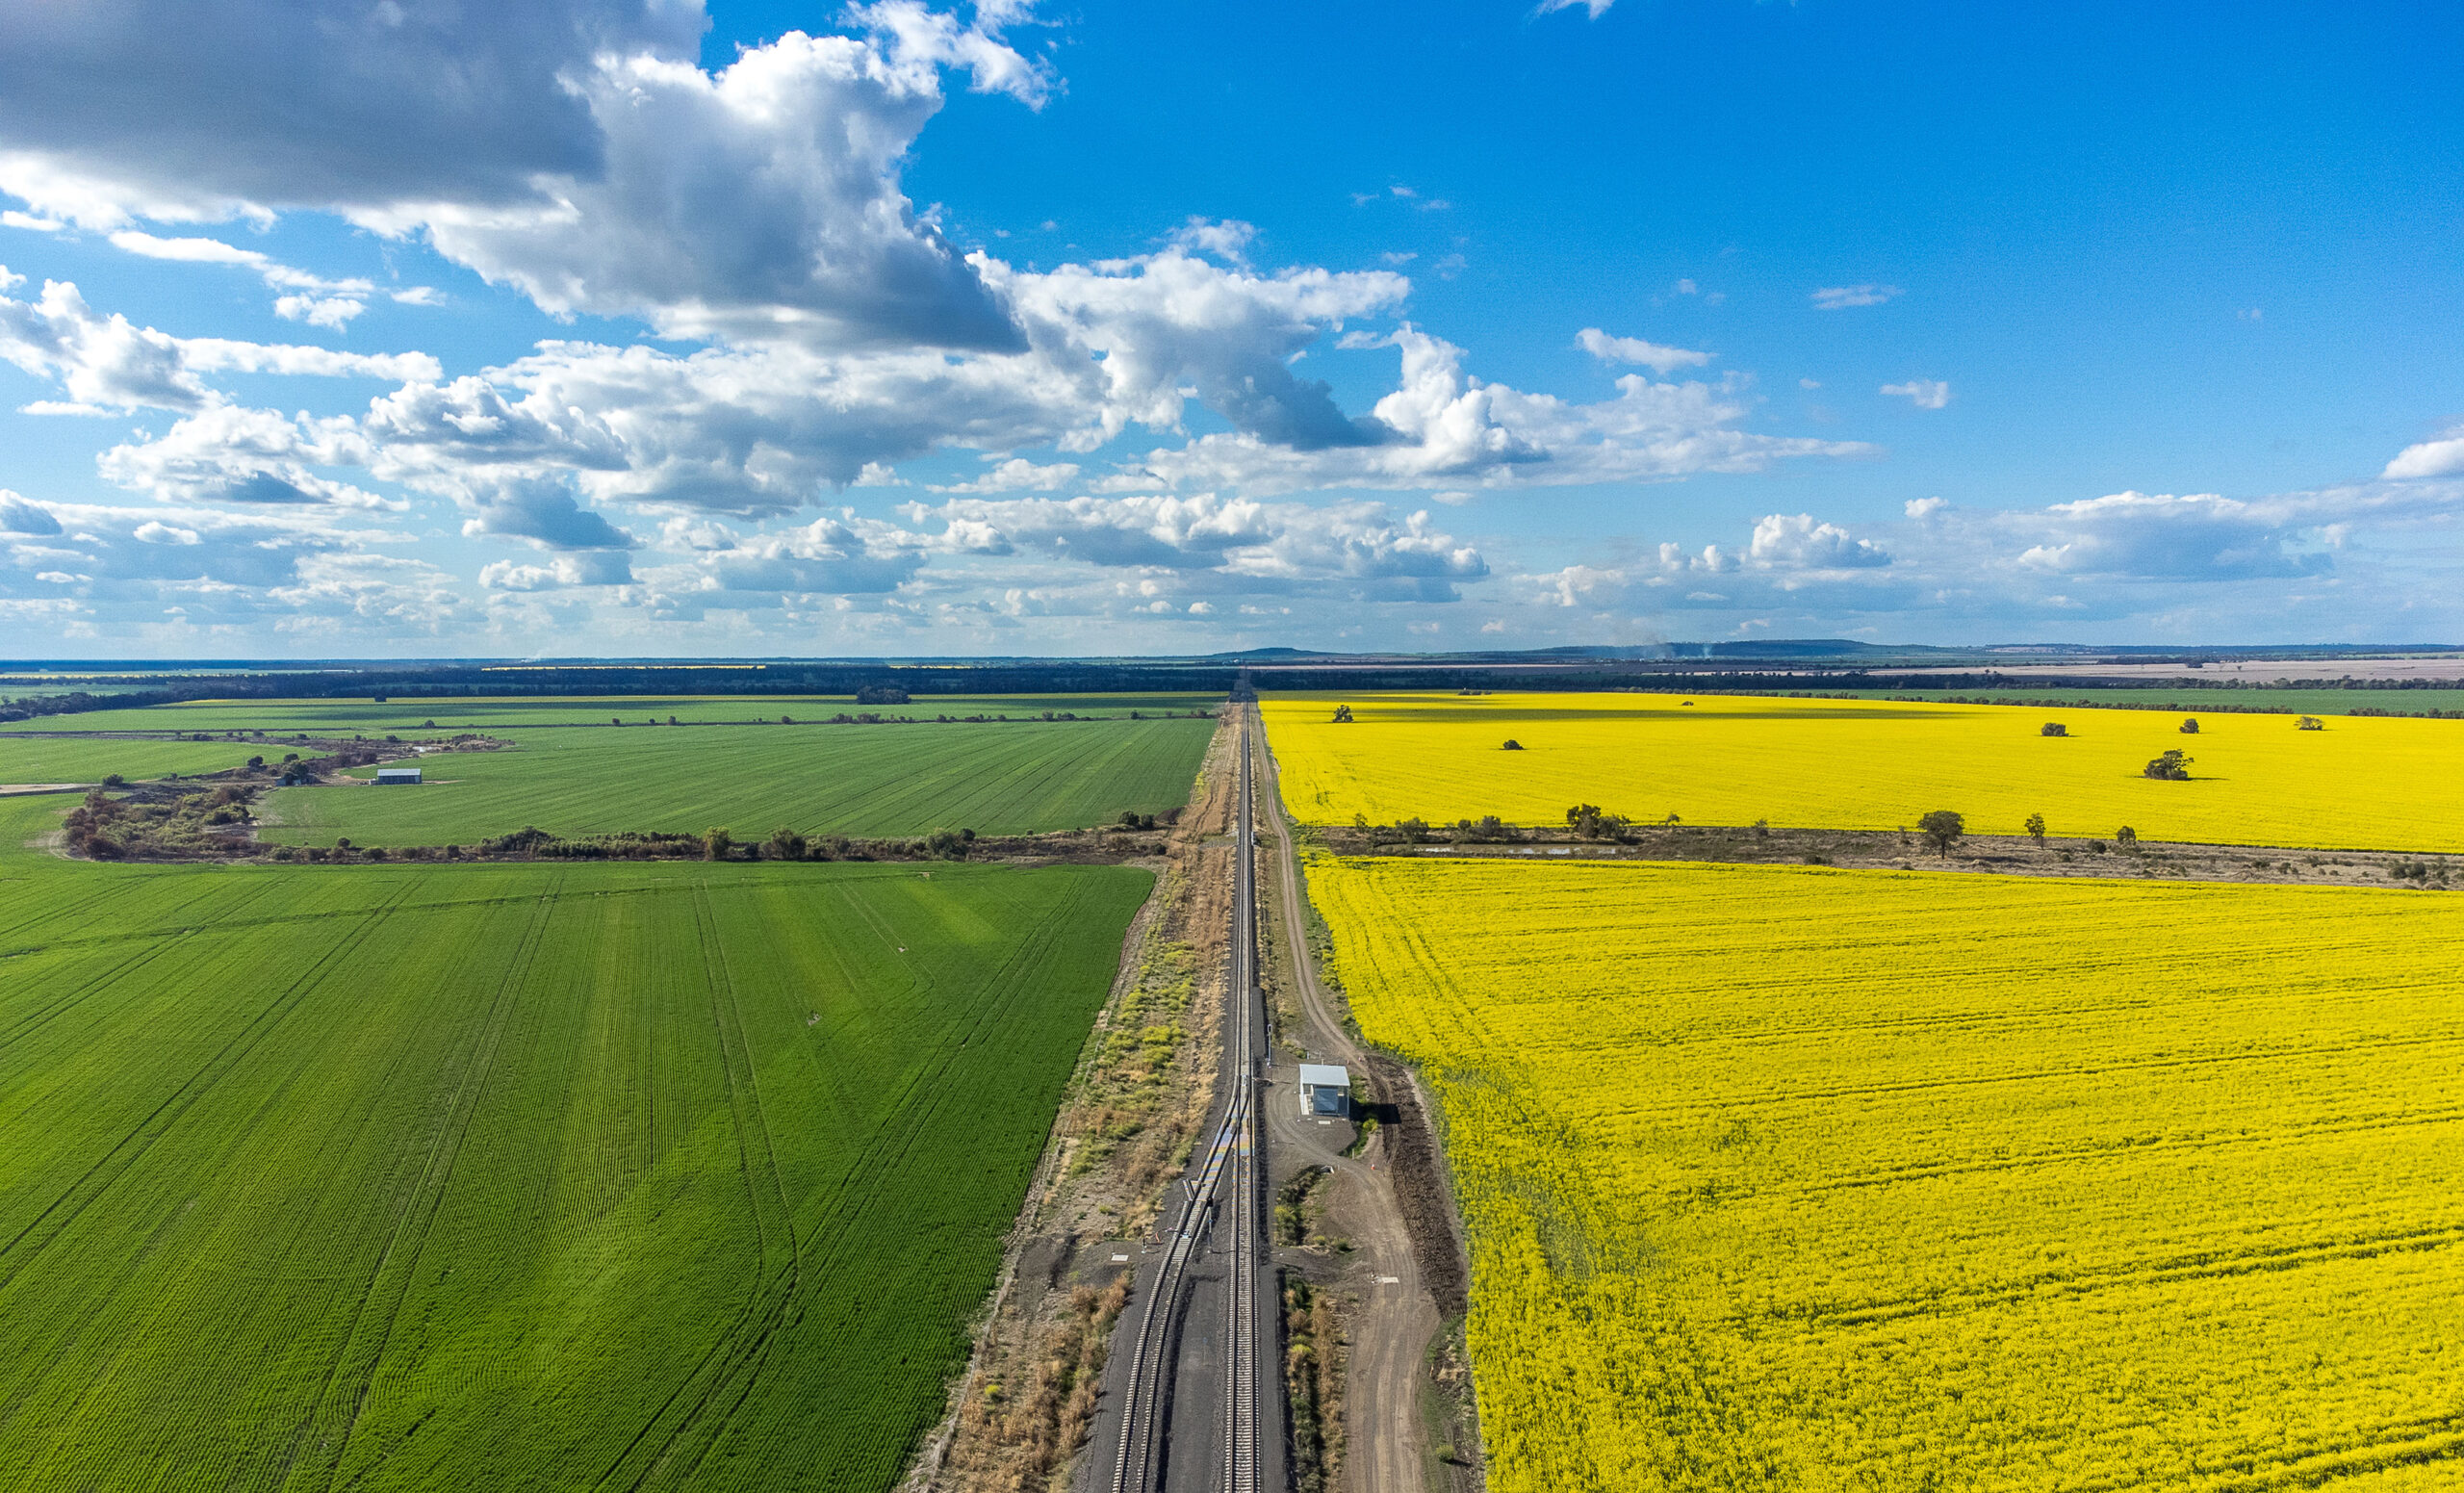 Aerial image showing canola fields north of Milguy, NSW